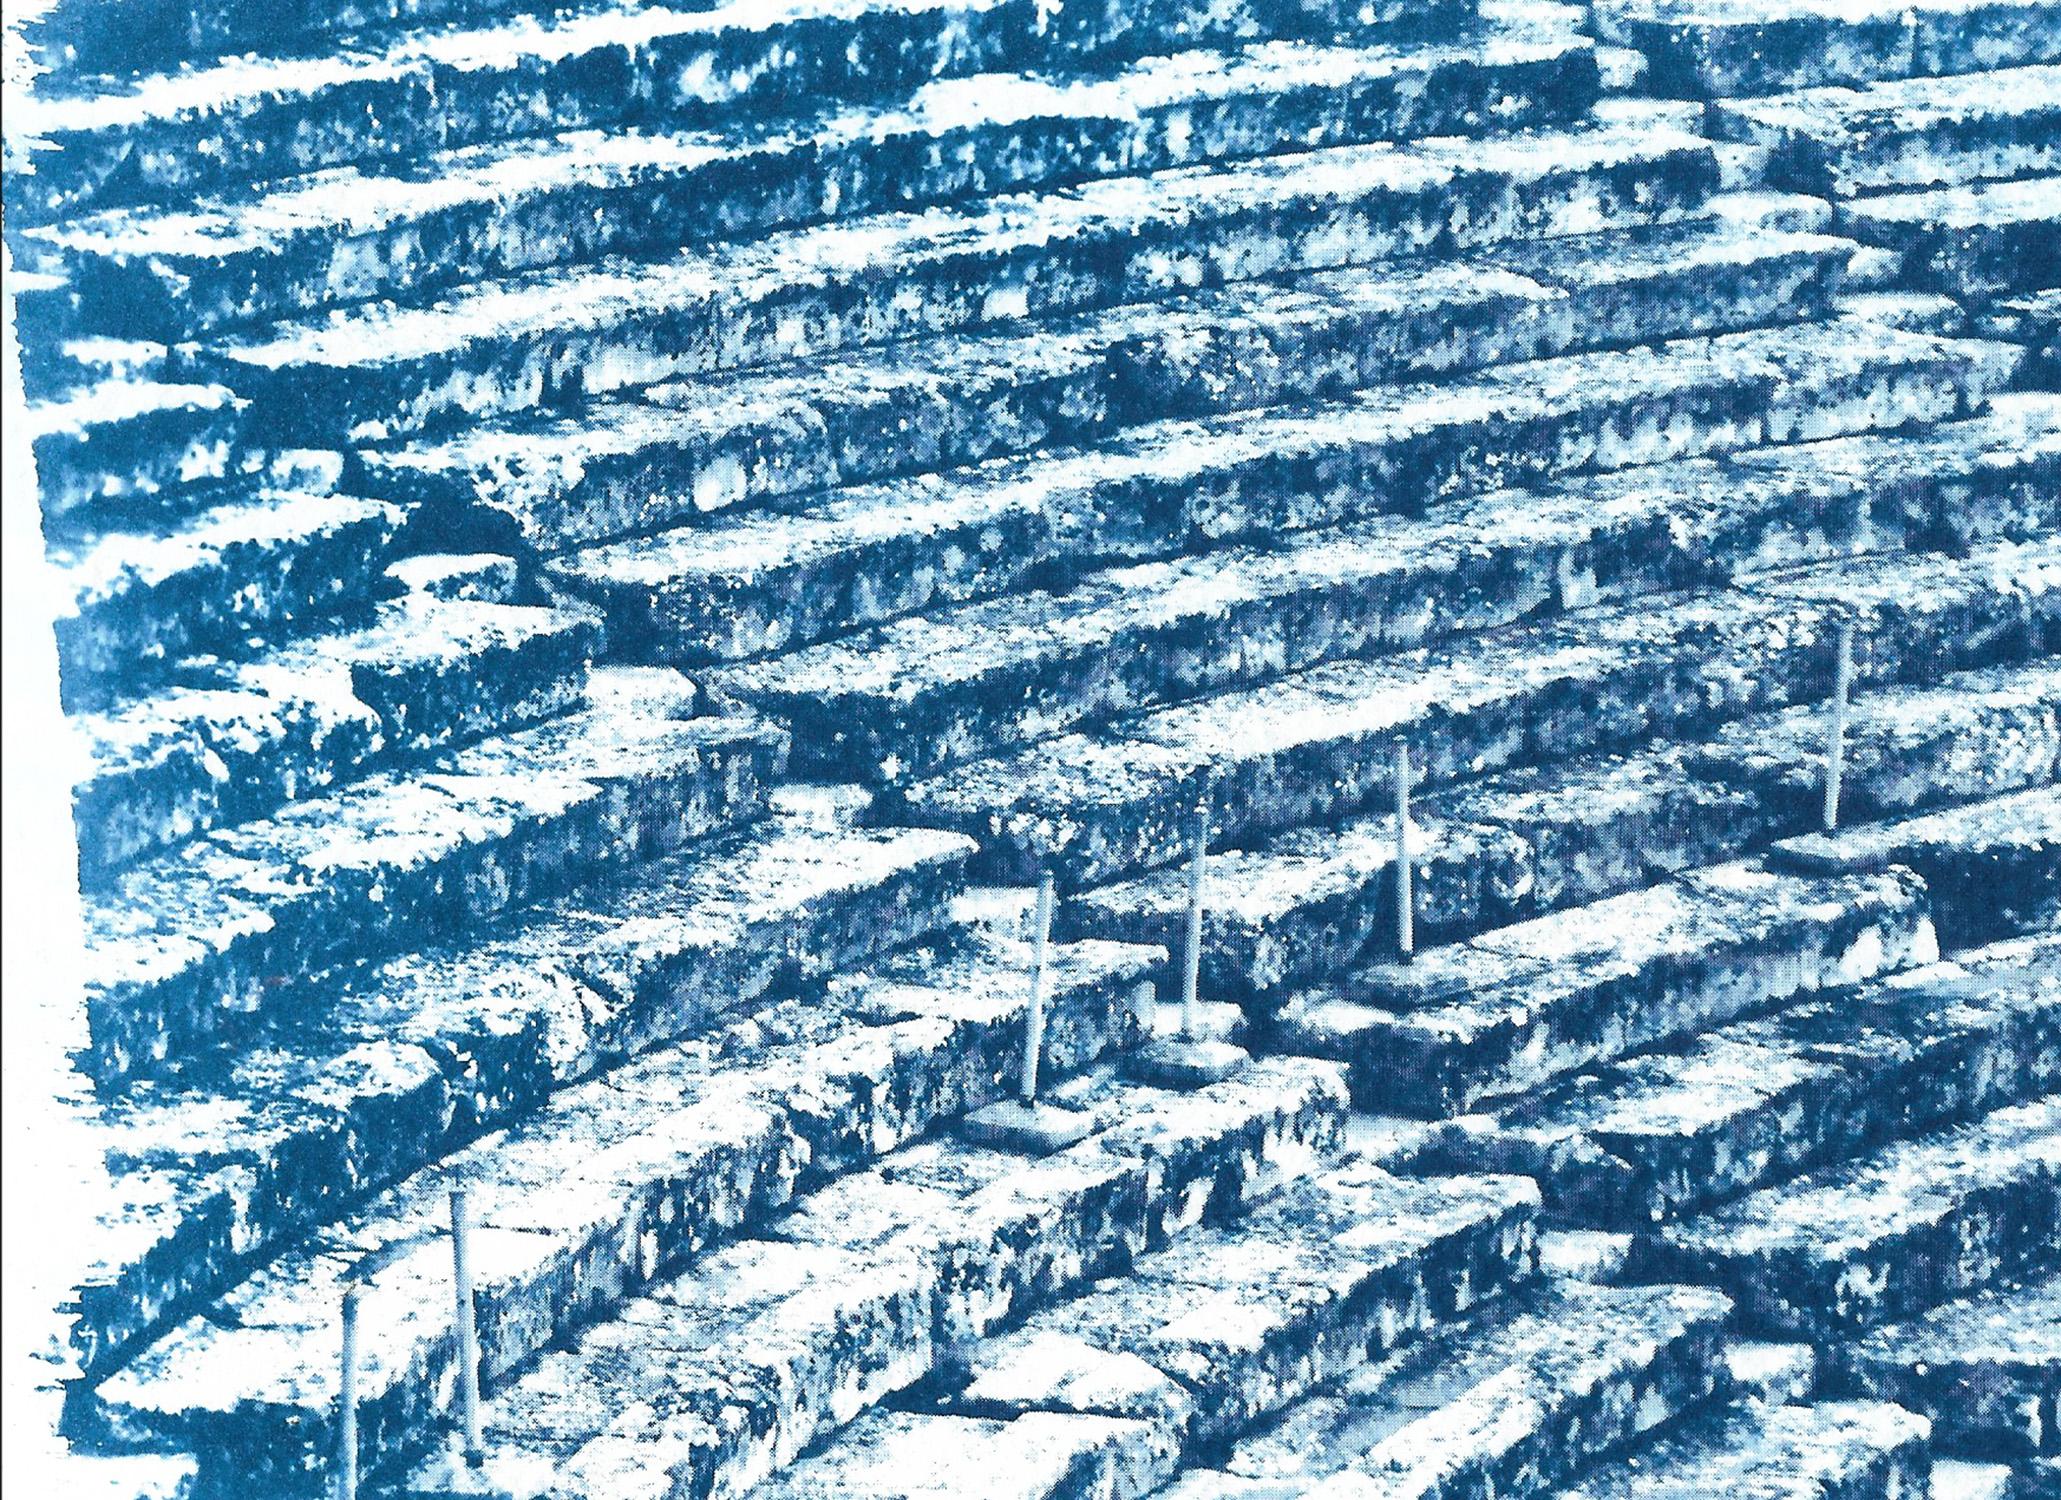 Diptych of Ancient Theatres, Handmade Cyanotype, Greek and Roman Architecture - Modern Print by Kind of Cyan